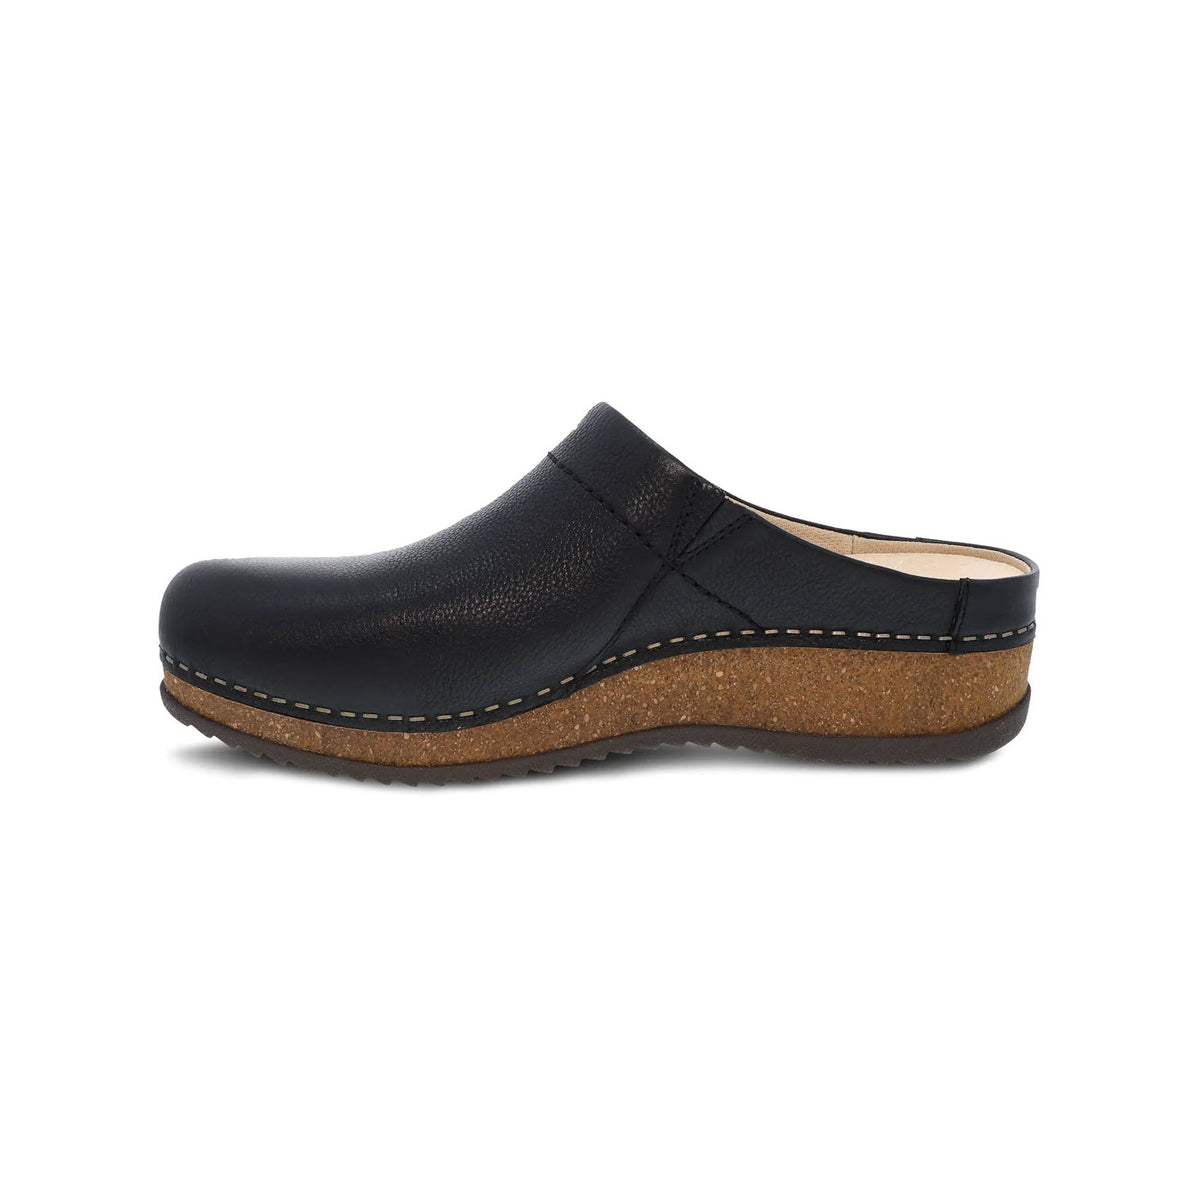 Dansko Mariella Black - Womens open back clog with cork sole isolated on a white background.